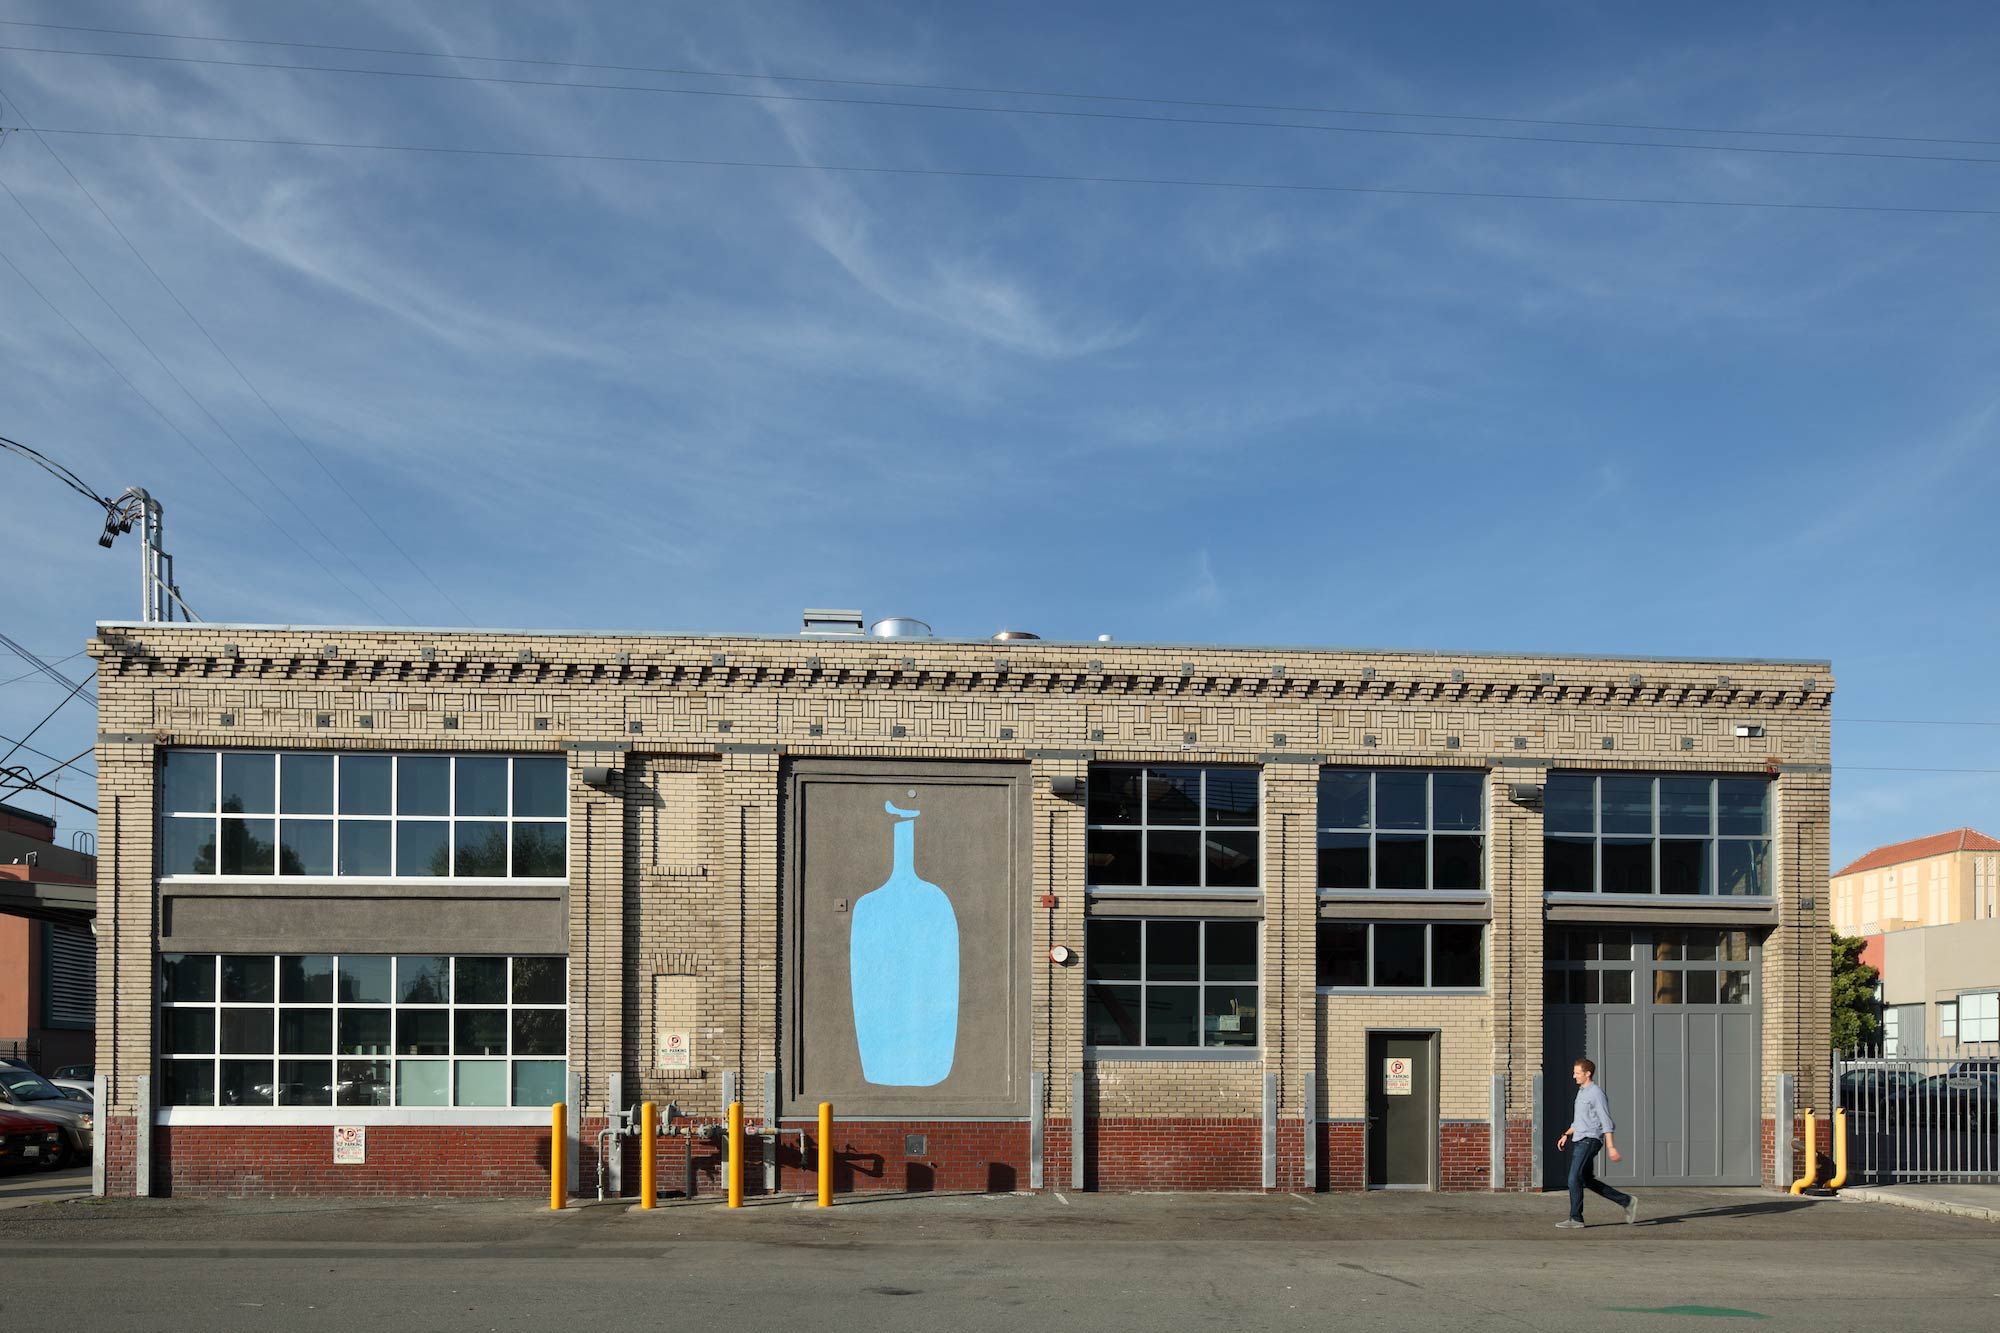 Former Oakland roastery with large Blue Bottle logo on face of the building